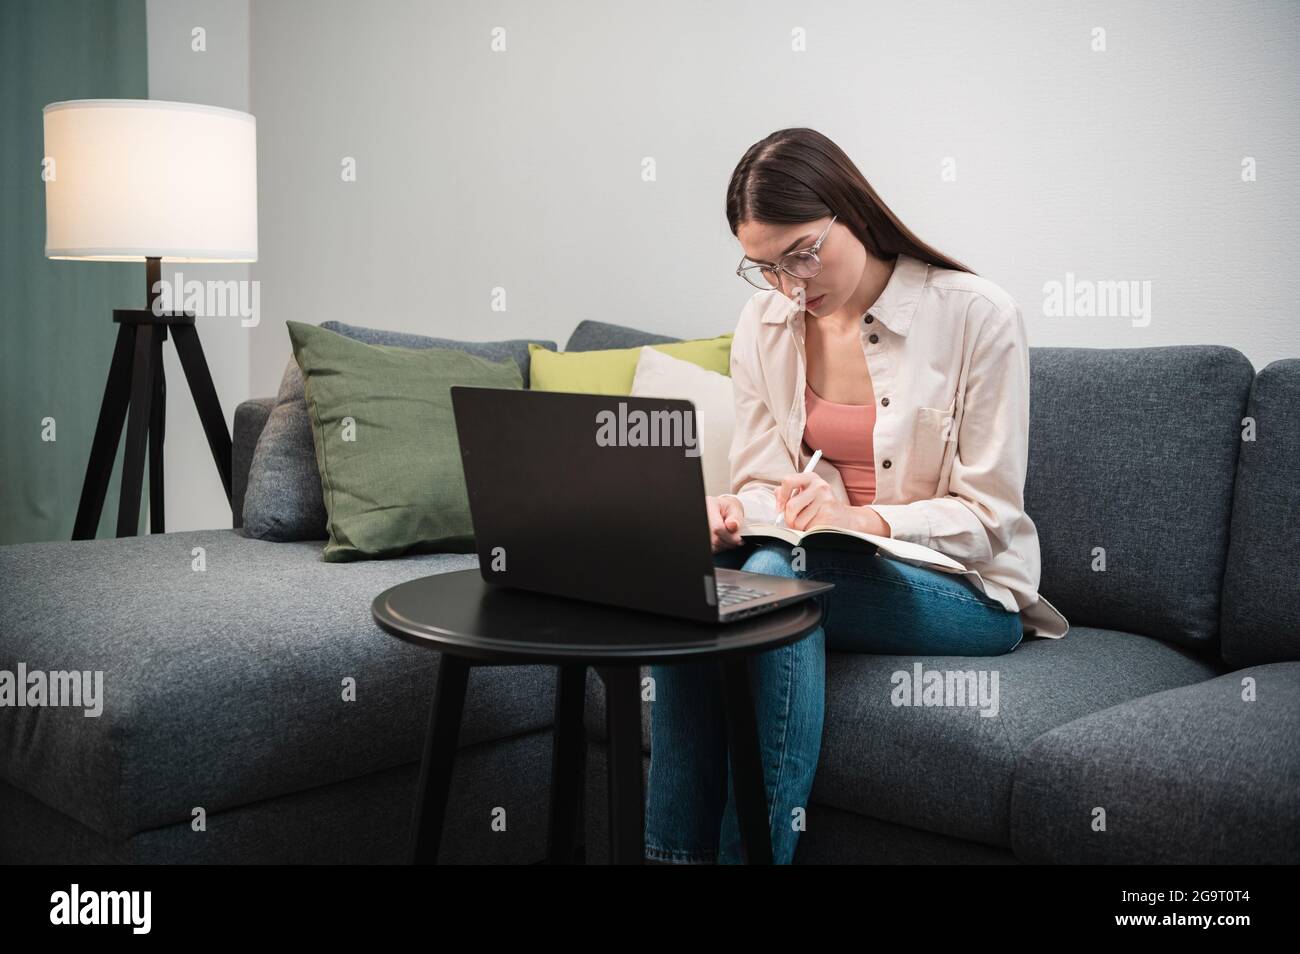 A young specialist girl is at a remote job, she is sitting at home on the couch, on the table next to her is a laptop. Stock Photo